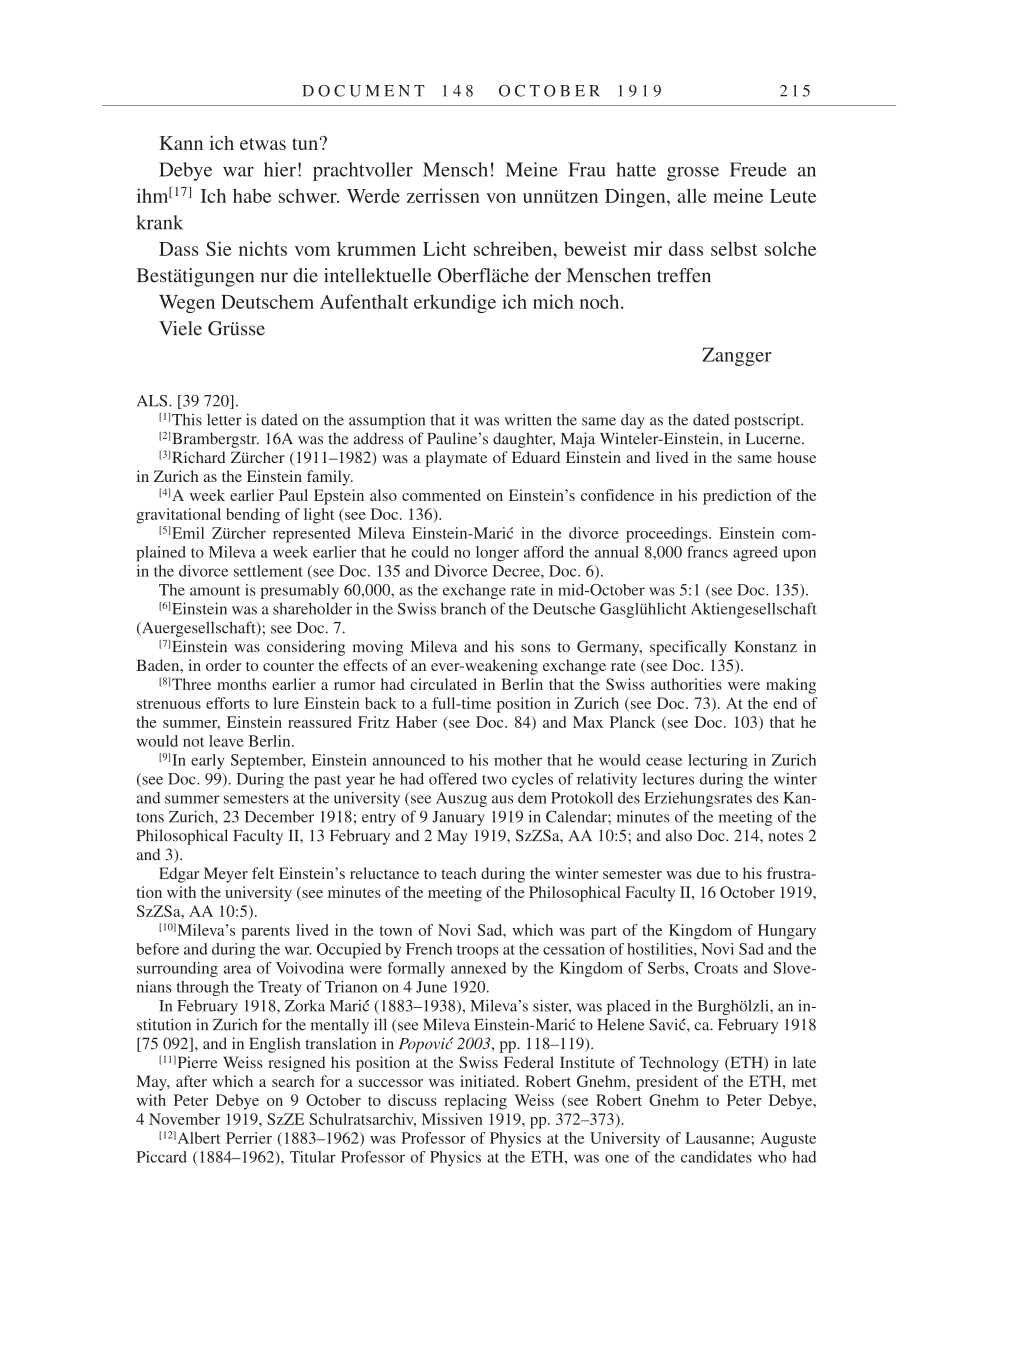 Volume 9: The Berlin Years: Correspondence January 1919-April 1920 page 215